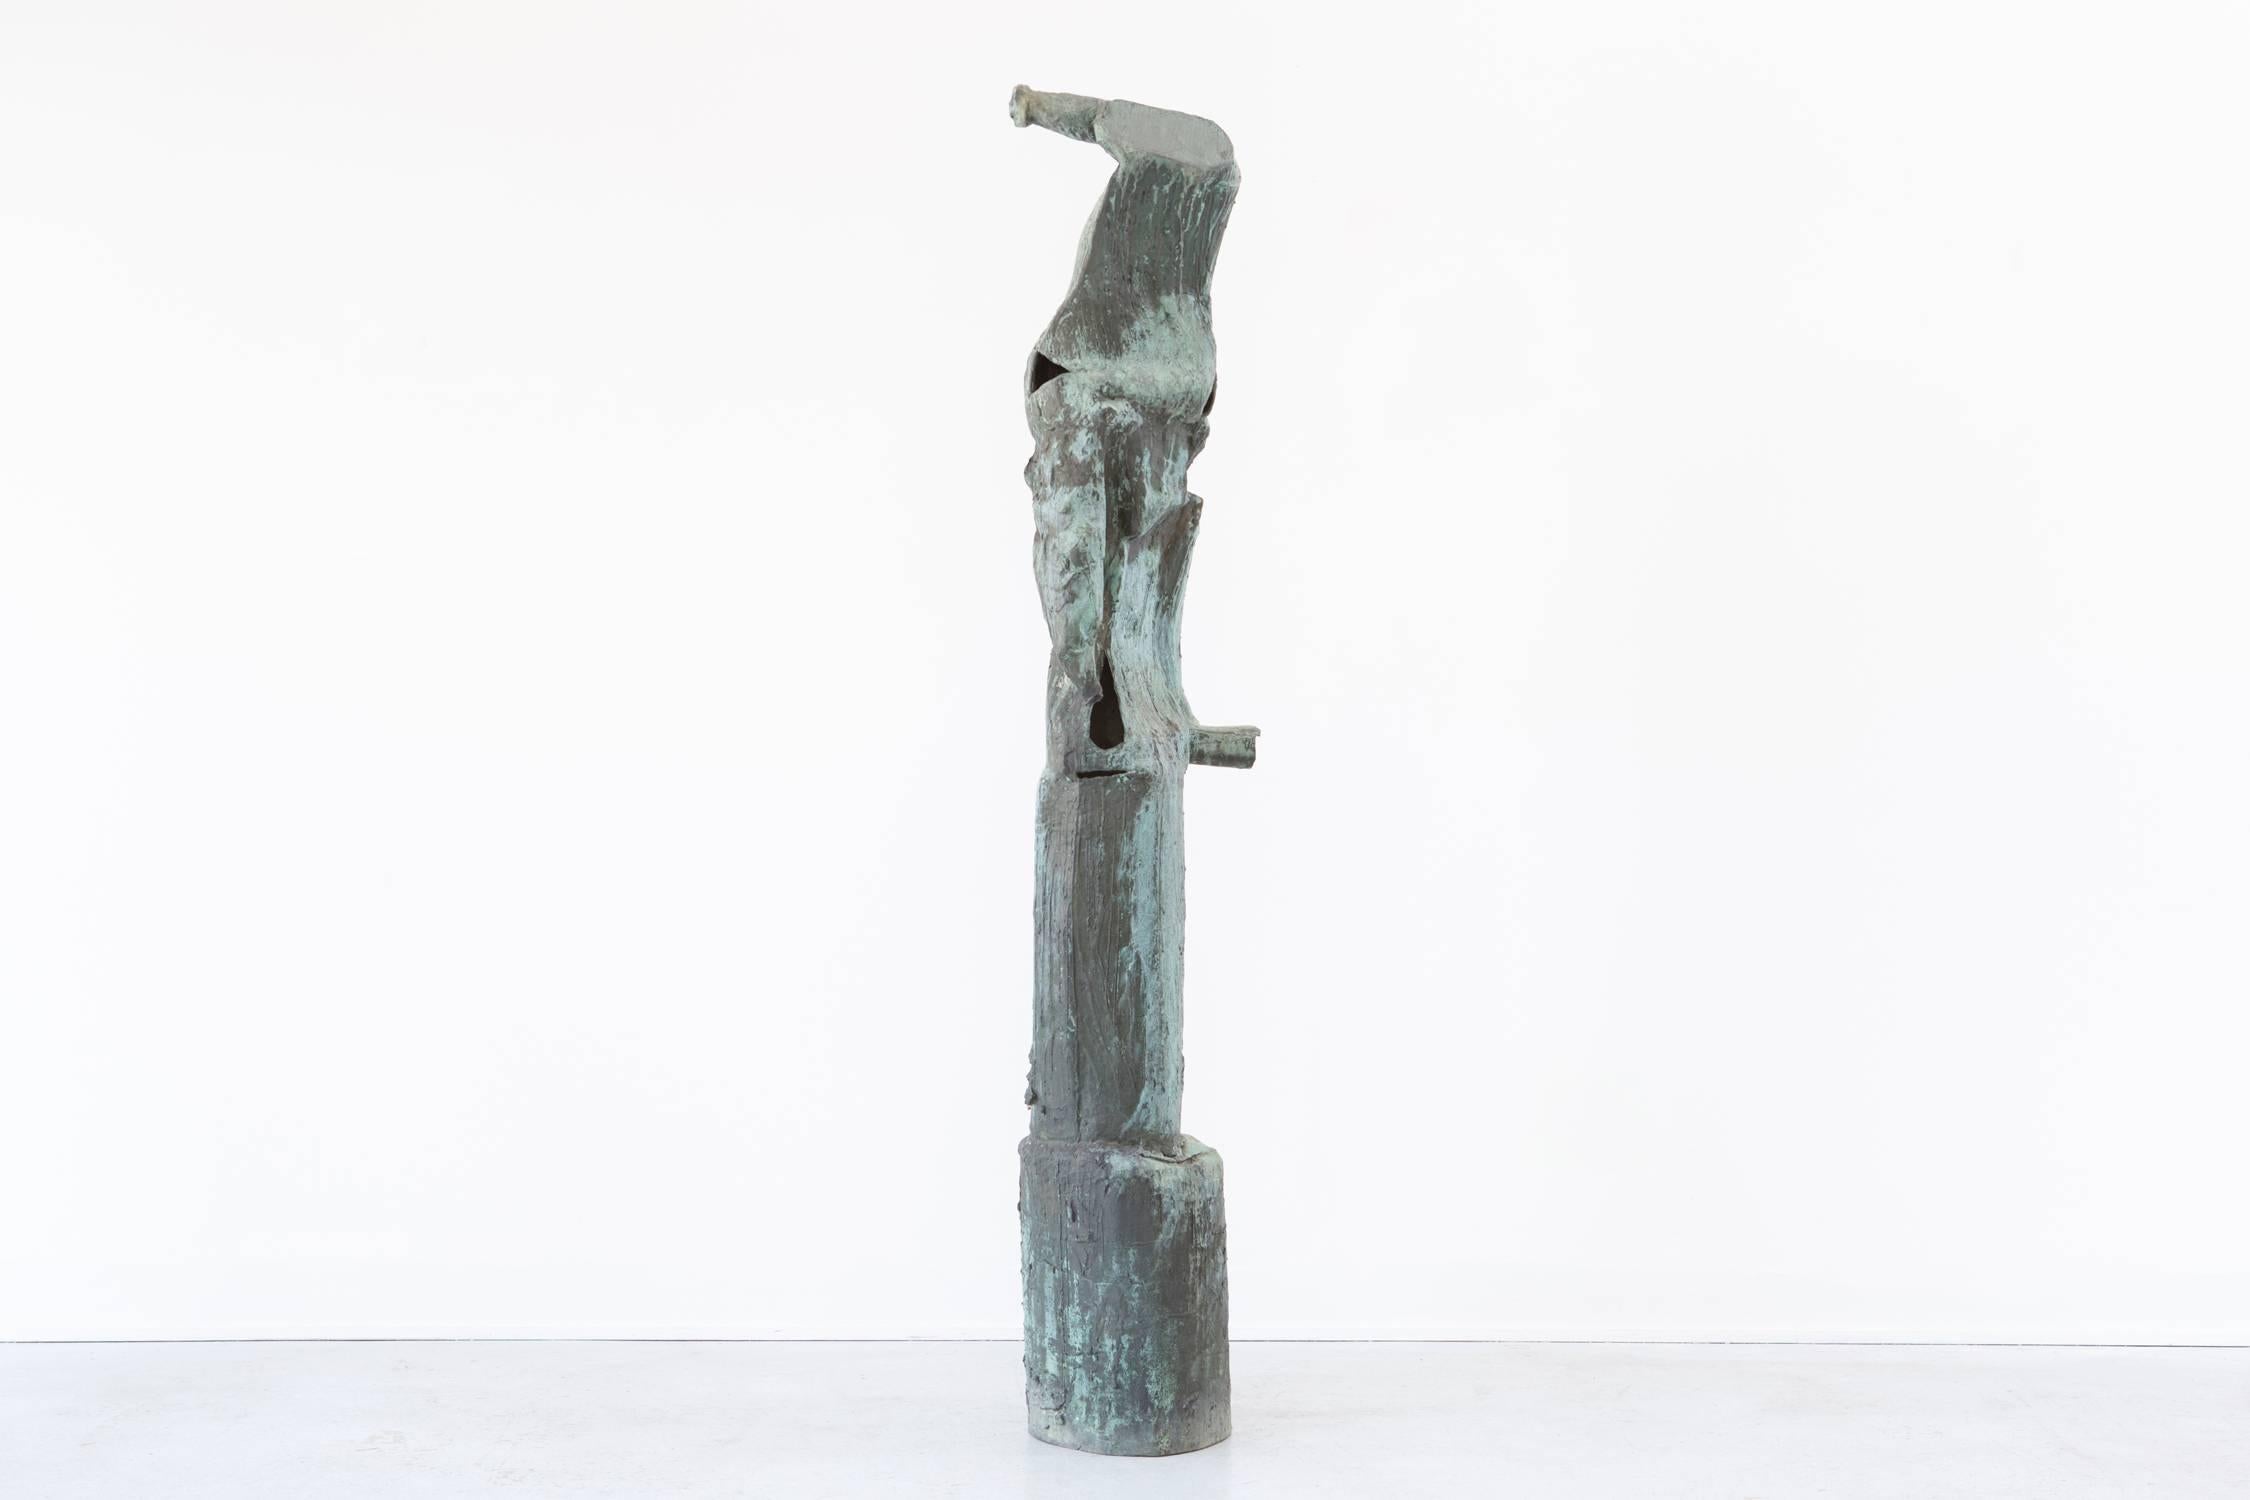 Patinated 1960's Monumental Brutalist Stan Mock Sculpture Standing 6 Feet Tall  For Sale